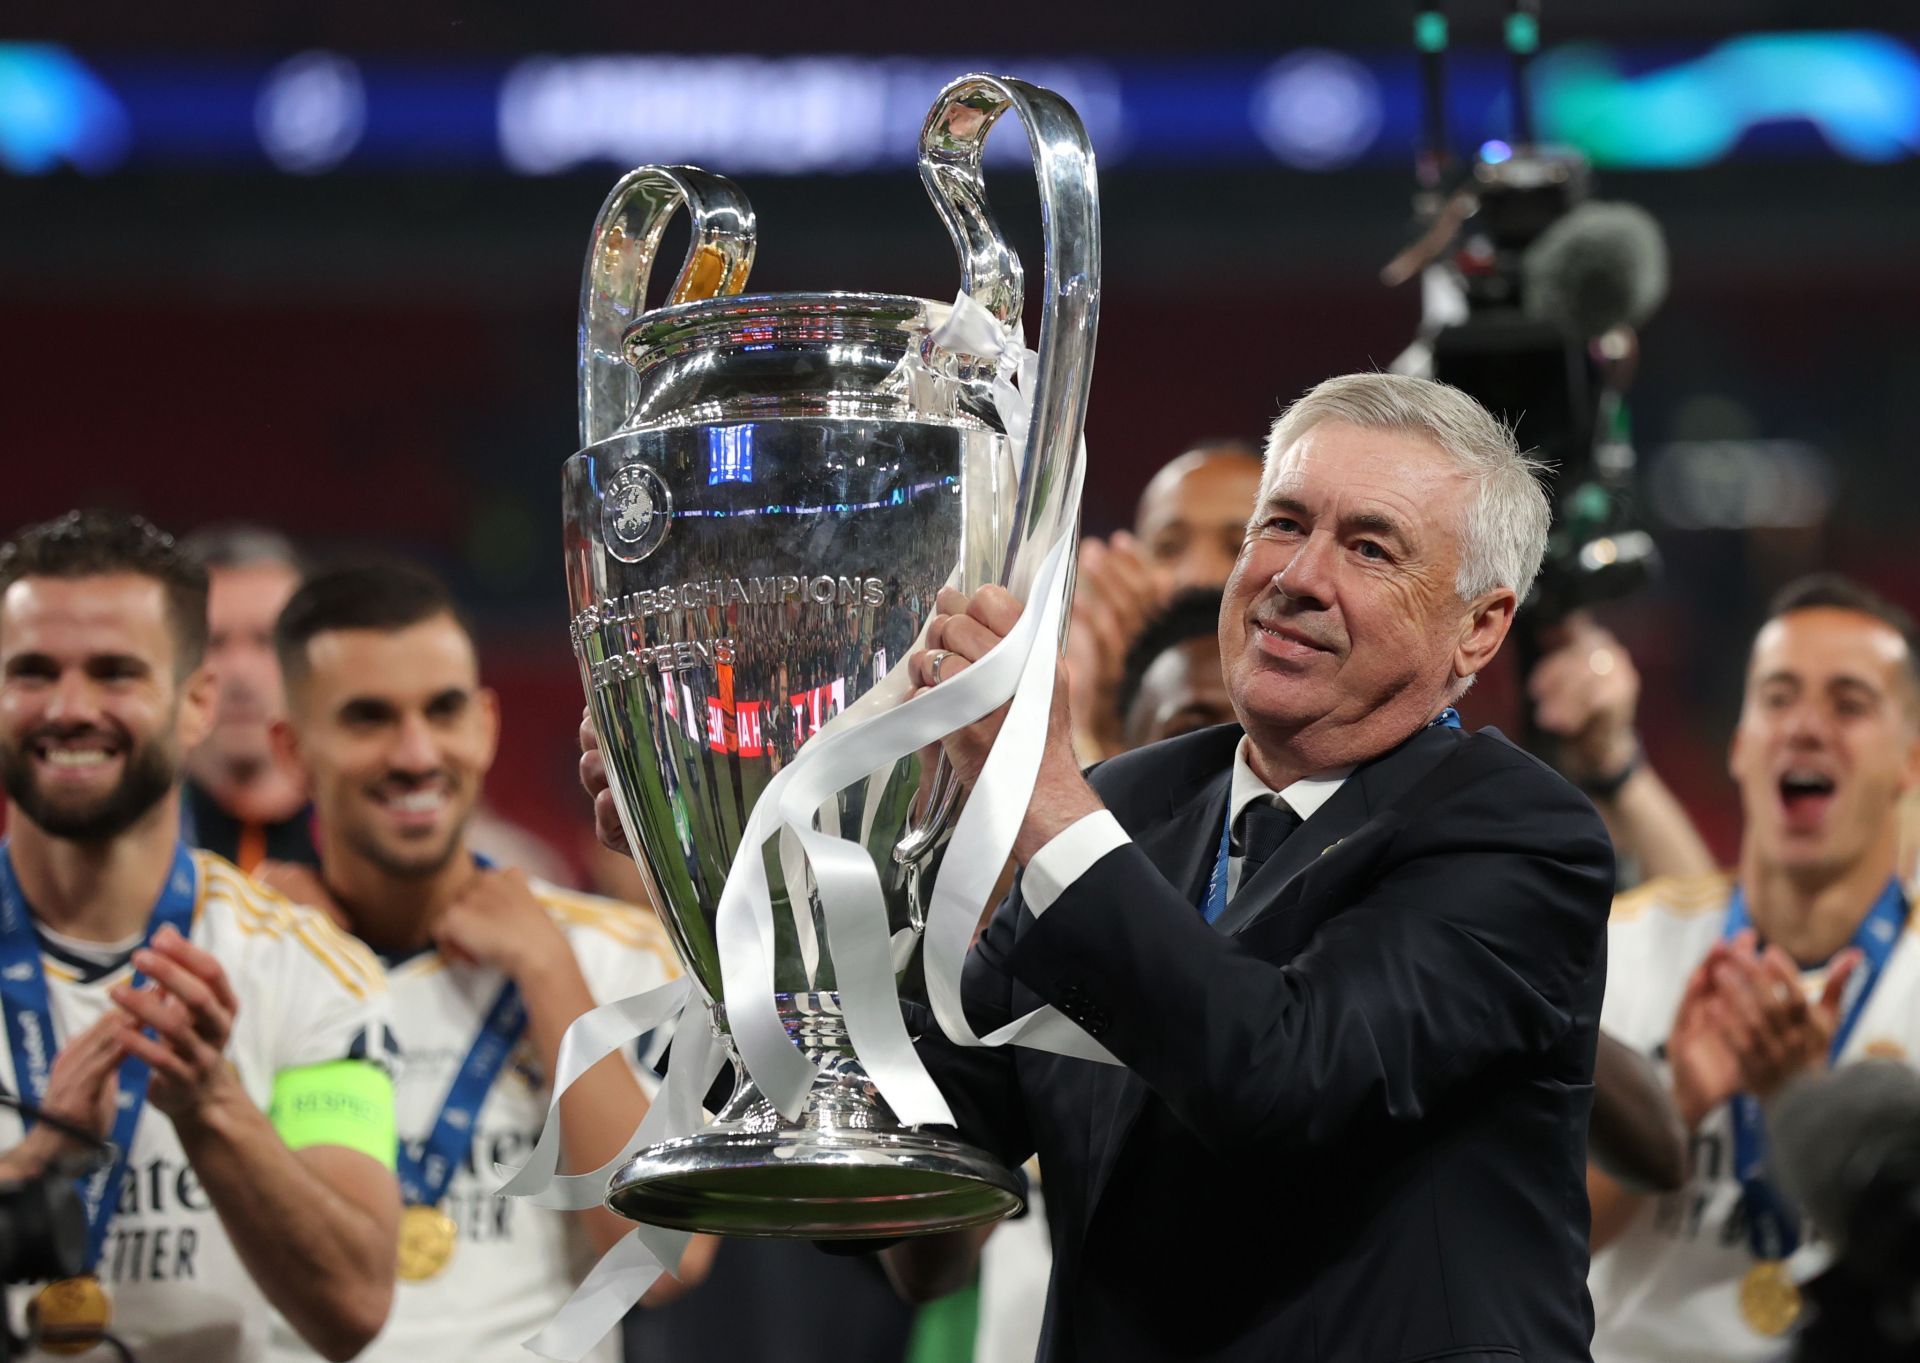 How many UEFA Champions League trophies does Carlo Ancelotti have in